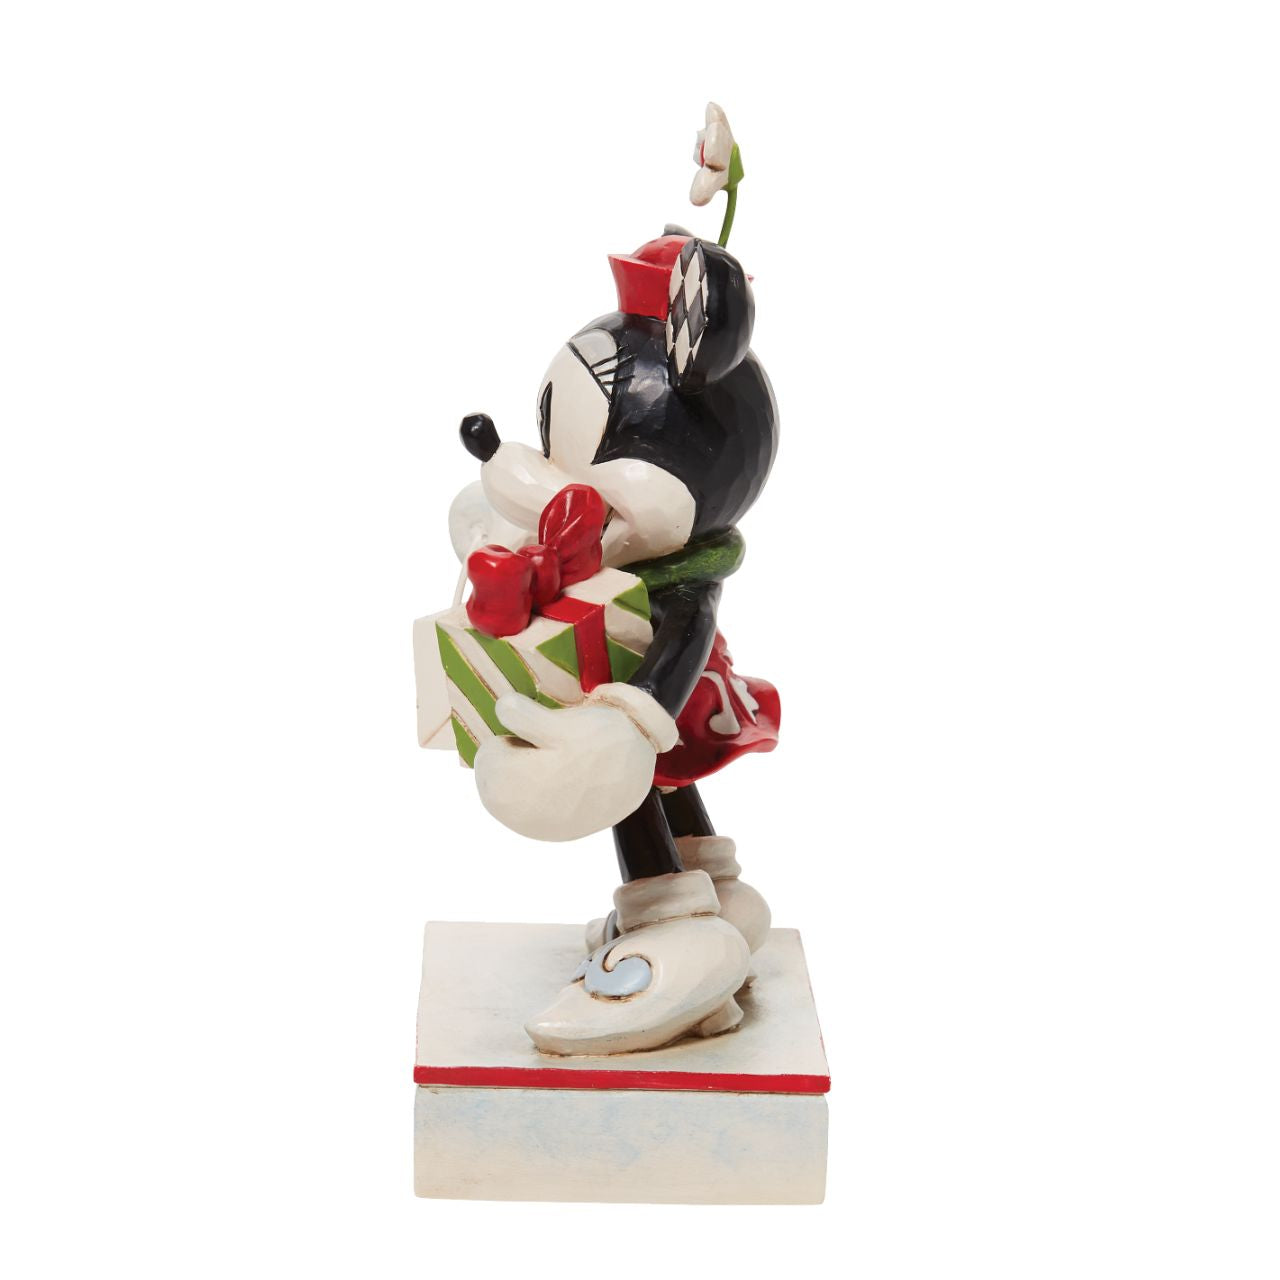 Jim Shore Christmas Minnie with Bag and Present Figurine  Disney comes home for the holidays with this festive figurine by Jim Shore. Minnie Mouse is an icon of fashion and friendliness this year as she completes her Christmas shopping. Boasting with bags, she's eager to share the giving spirit with you.